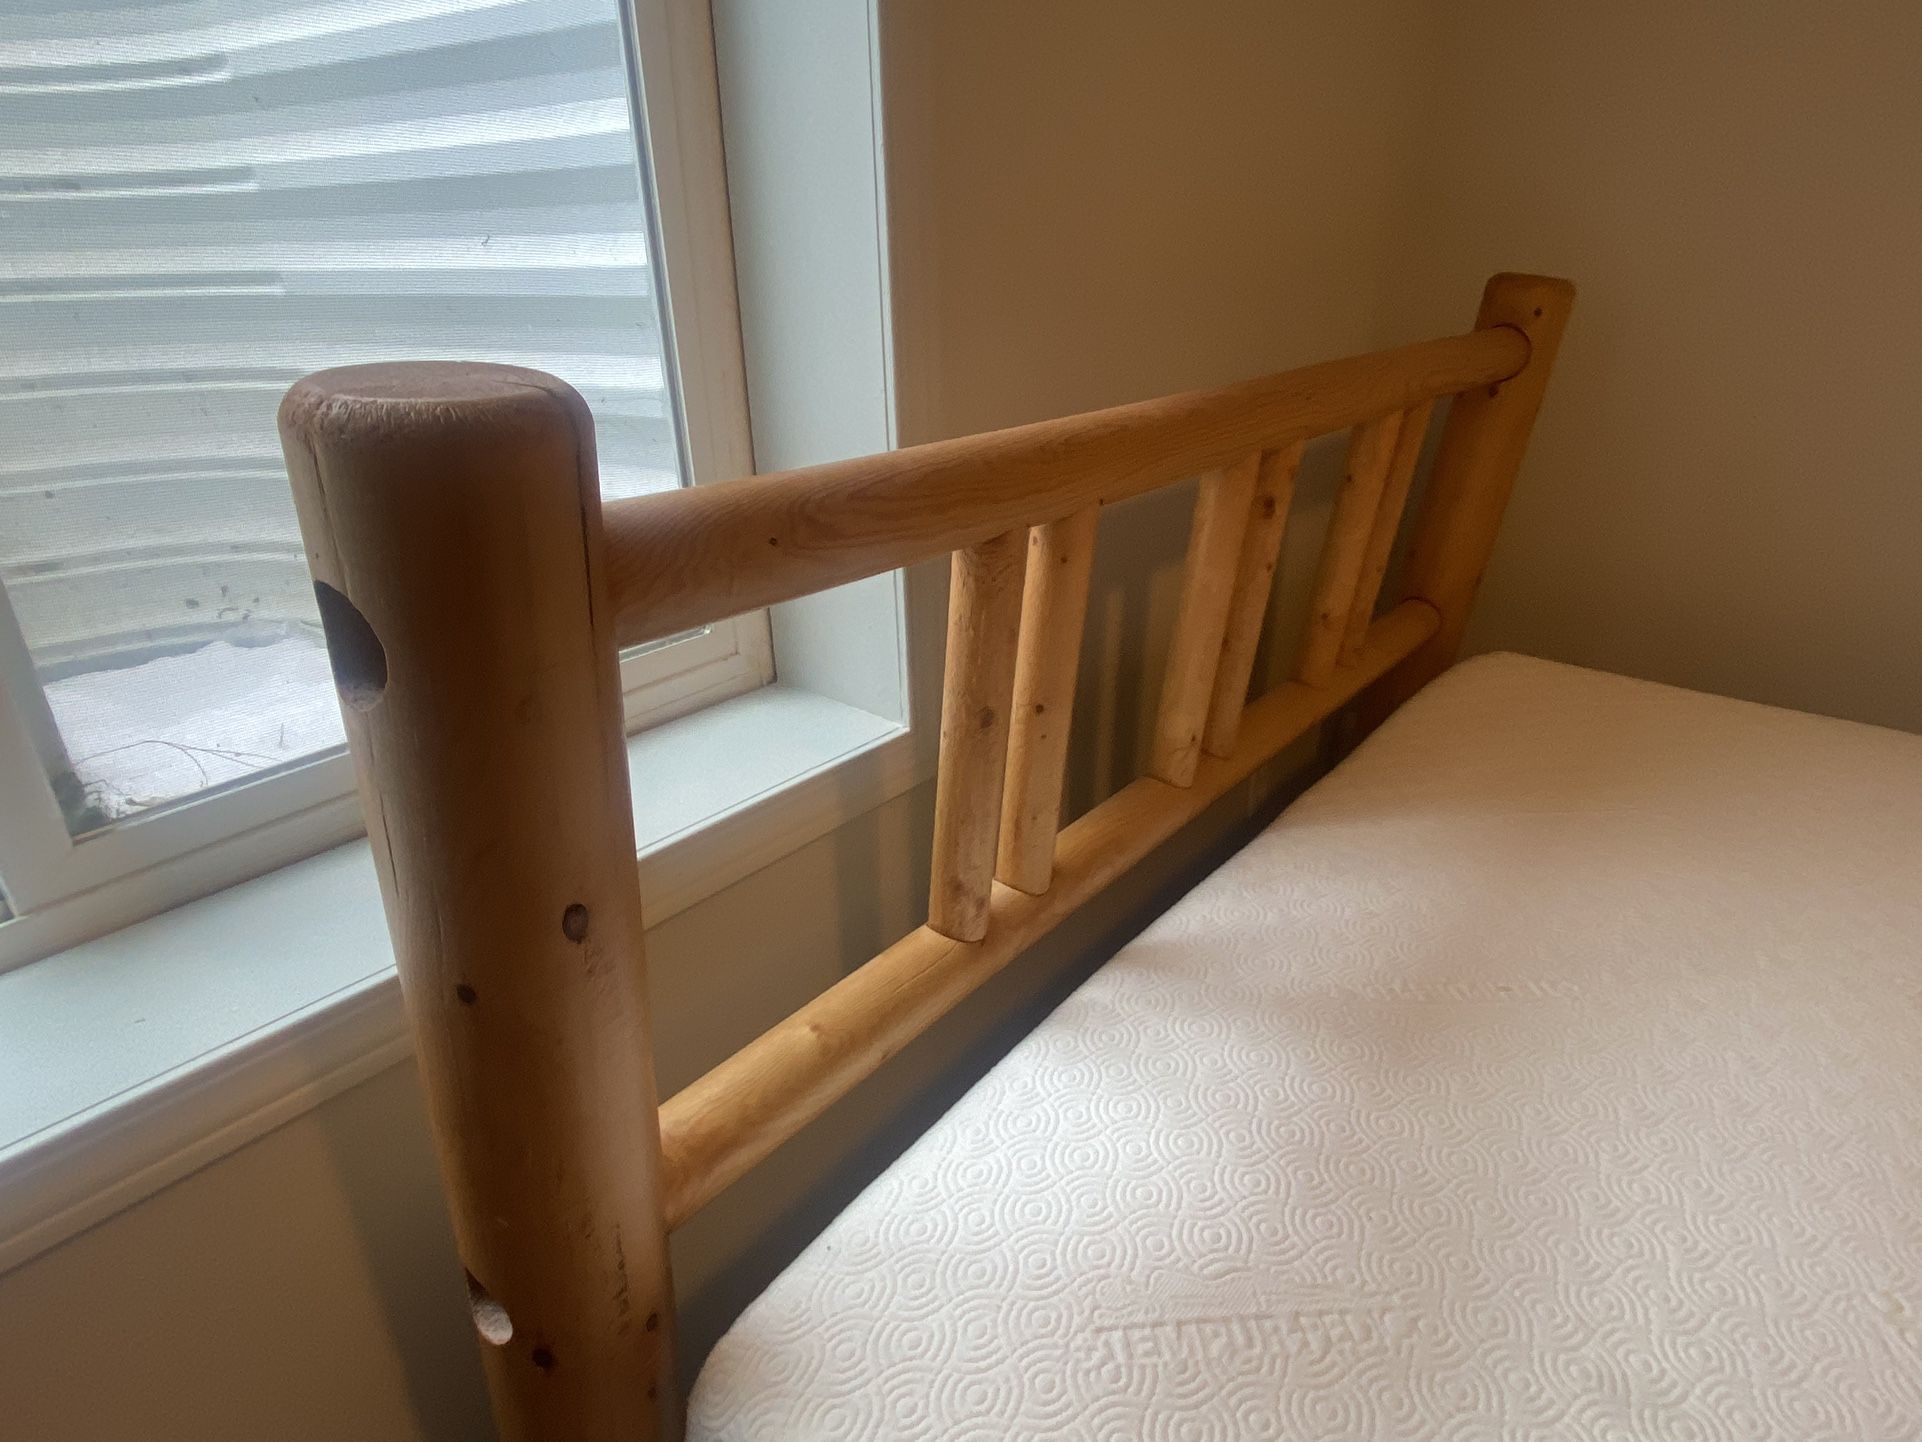 Log bed frame - queen size